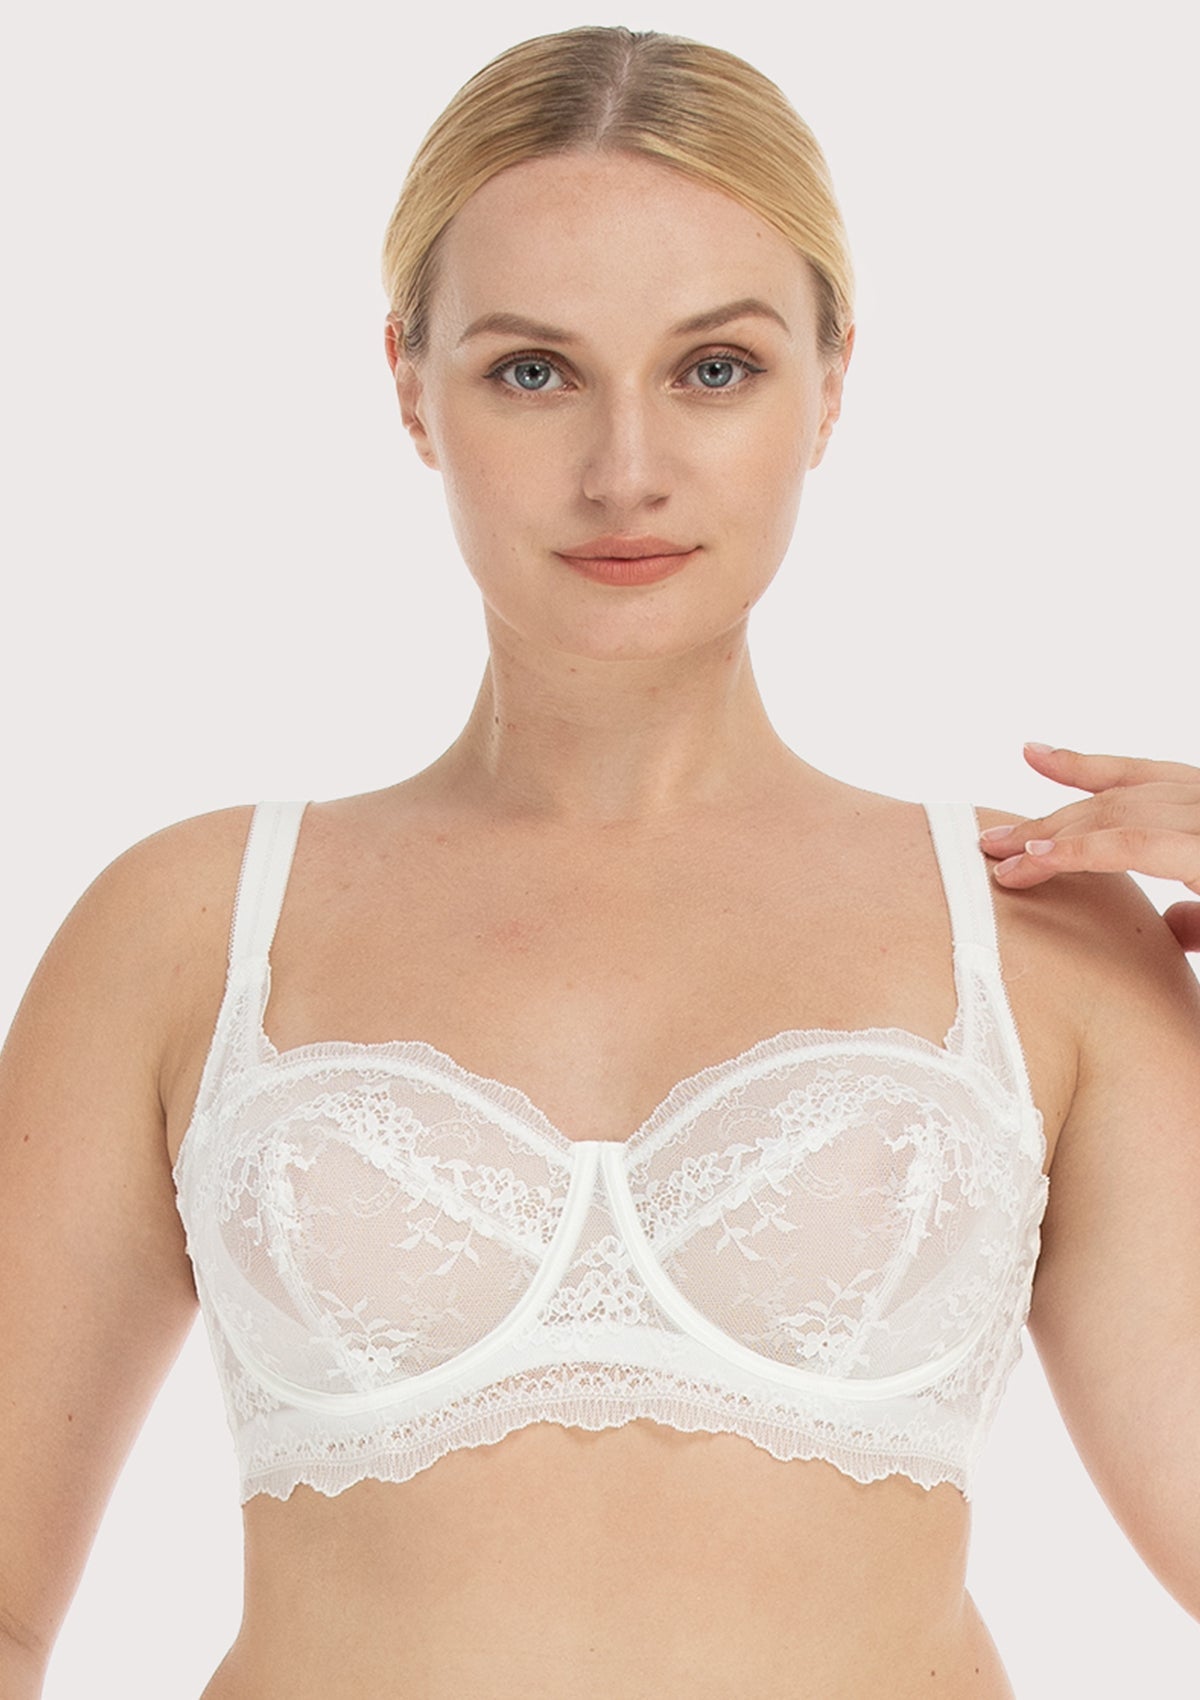 HSIA I Do Floral Lace Bridal Balconette Beautiful Bra For Special Day - Burgundy / 34 / DDD/F